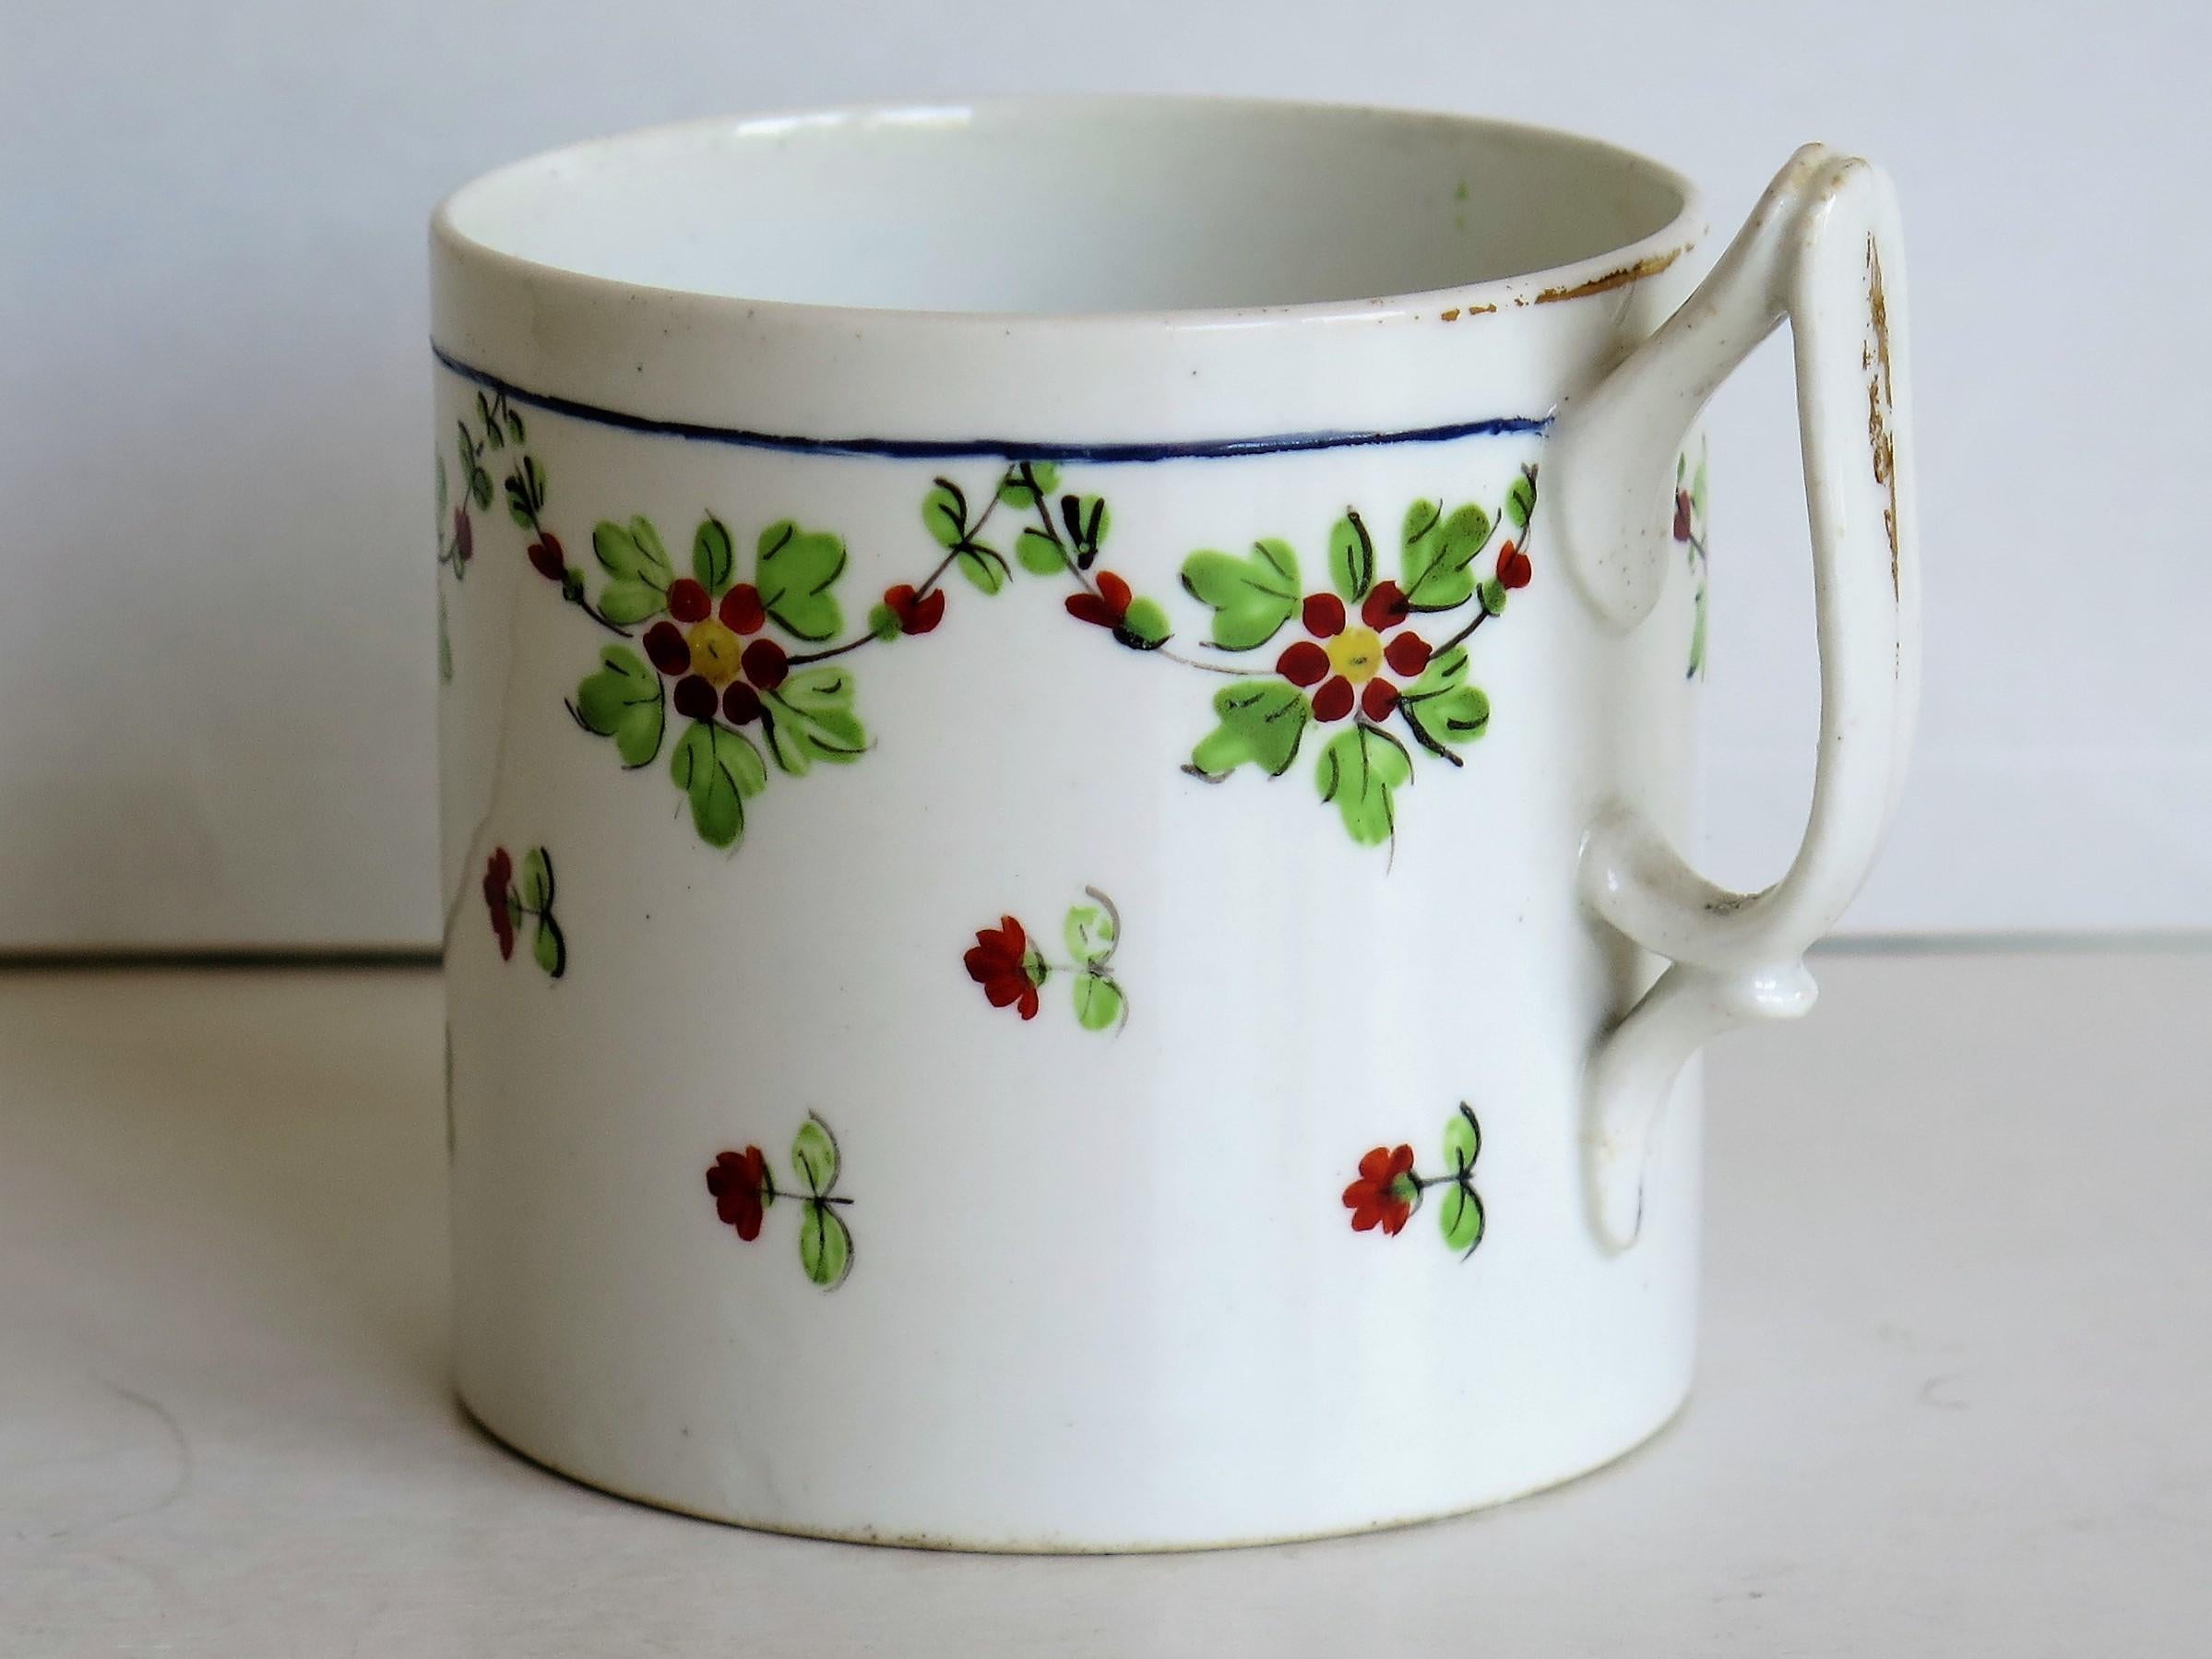 This is a very collectable, hand-painted porcelain coffee can (cup) , made by Derby Porcelain Co., England in the George III period, circa 1800.

The coffee can is straight sided and nominally 2.5 inches square excluding the handle. The handle is